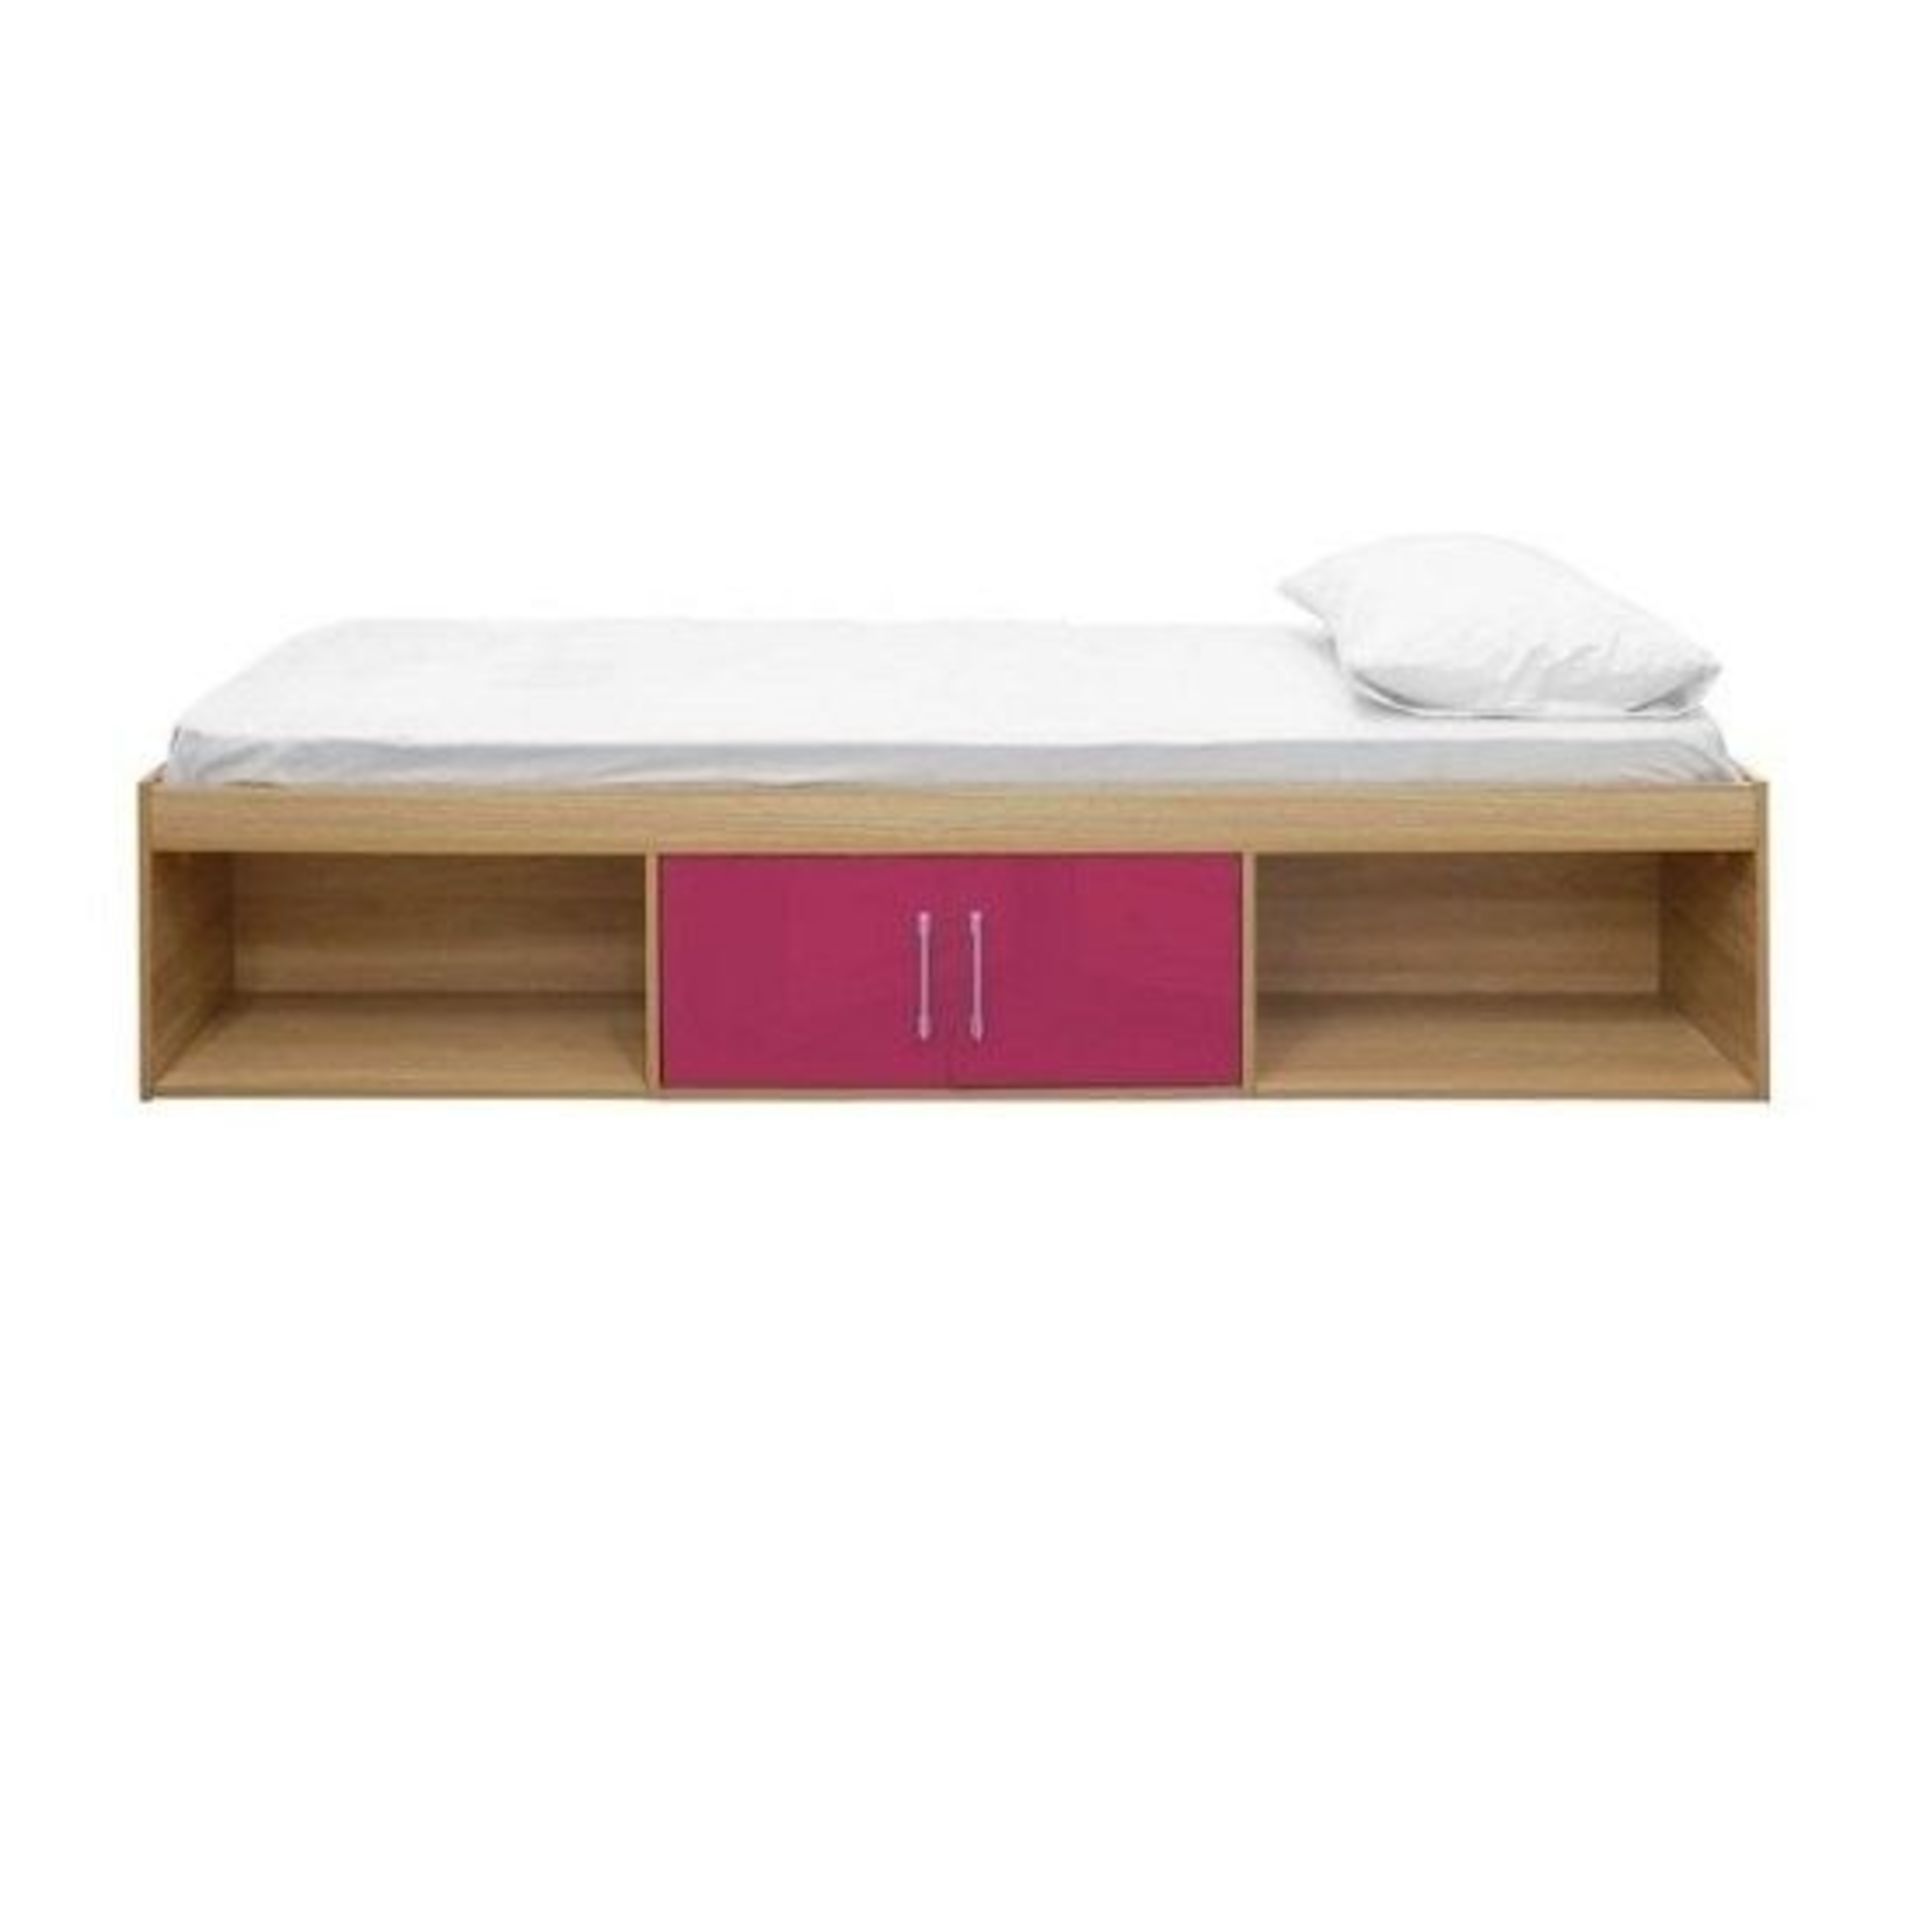 PALLET TO CONTAIN 4 X NEW BOXED Dakota Wooden Single Cabin Bed In High Gloss Pink And Matt Oak.